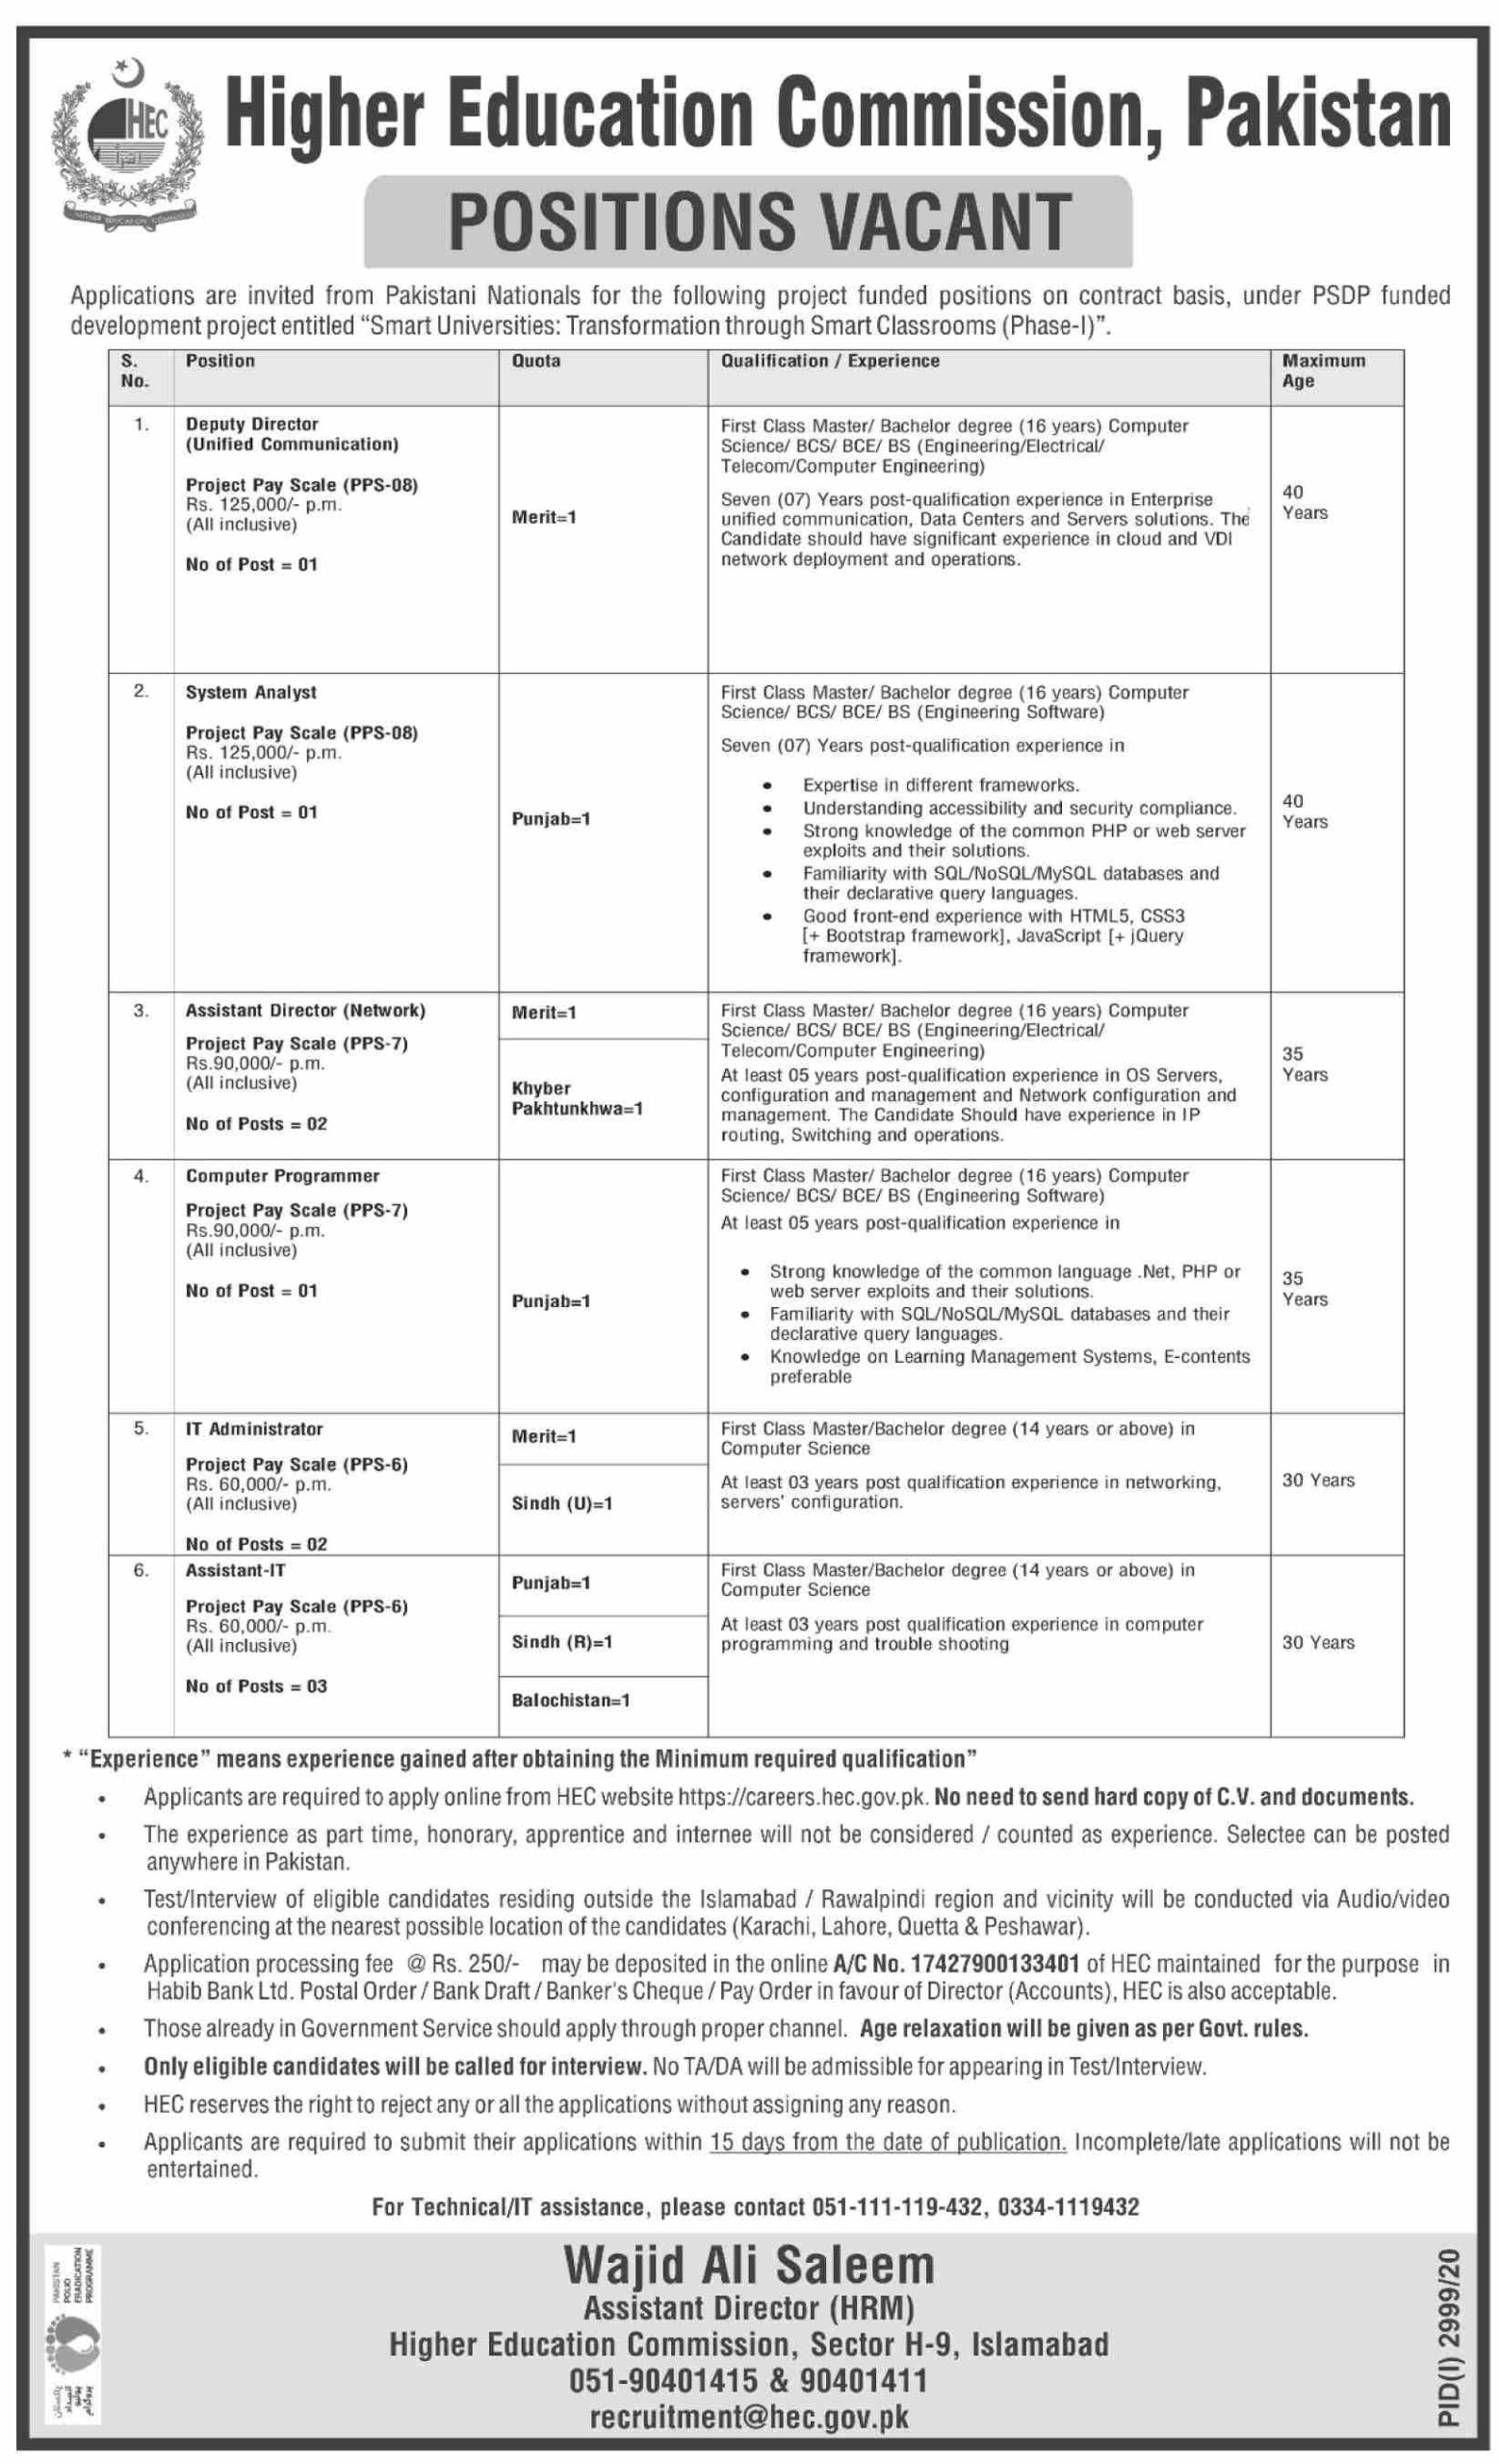 Jobs in Islamabad Higher Education Commission (HEC)